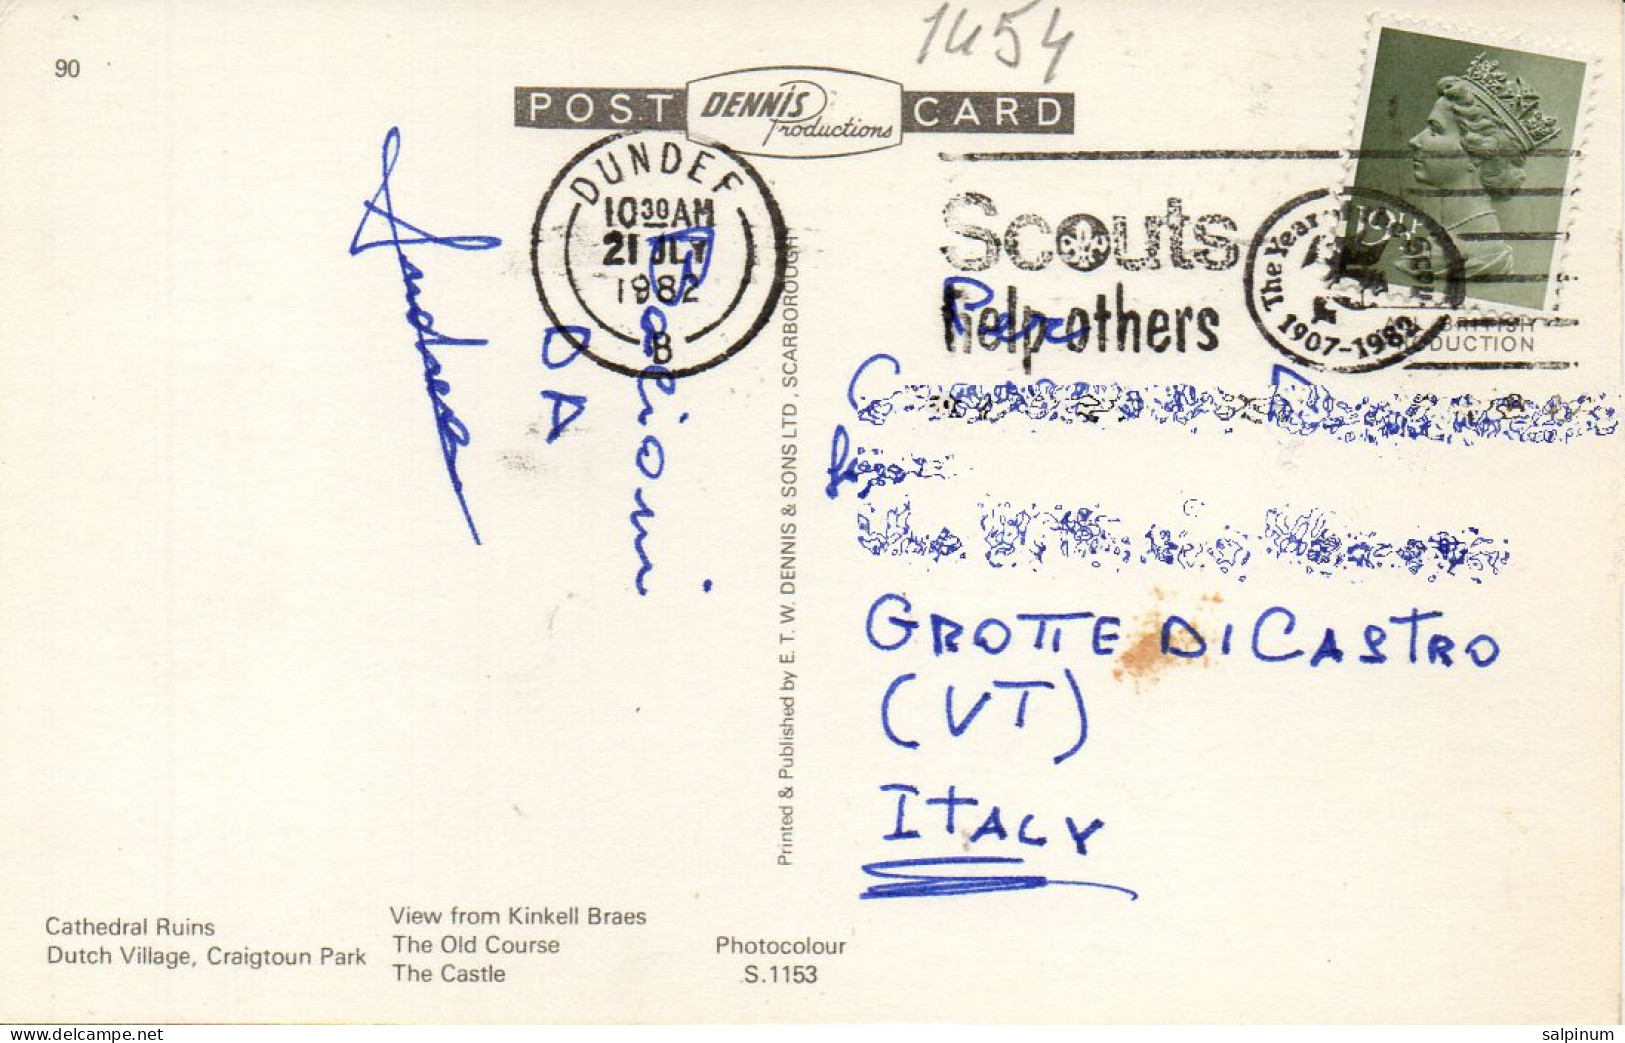 Philatelic Postcard With Stamps Sent From UNITED KINGDOM To ITALY - Cartas & Documentos